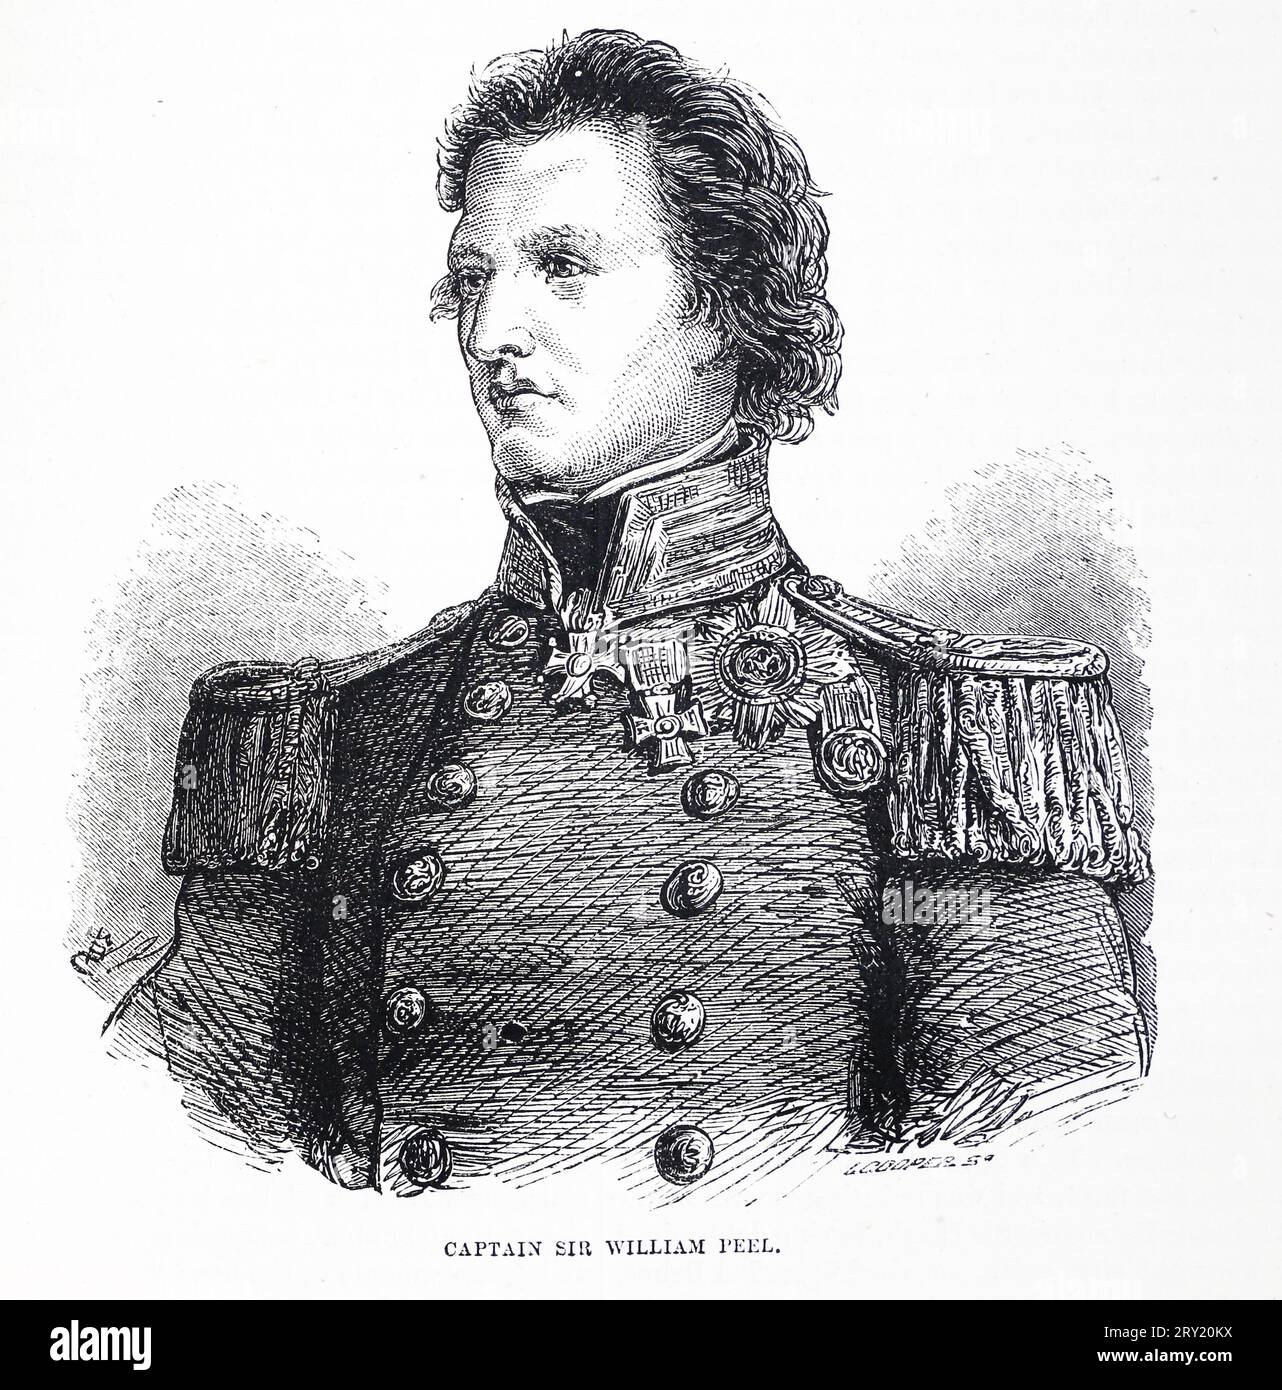 Portrait of Captain Sir William Peel VC KCB (2 November 1824 – 27 April 1858) was a British naval officer and recipient of the Victoria Cross. He was the third son of the British Prime Minister, Sir Robert Peel. Black and White Illustration Stock Photo